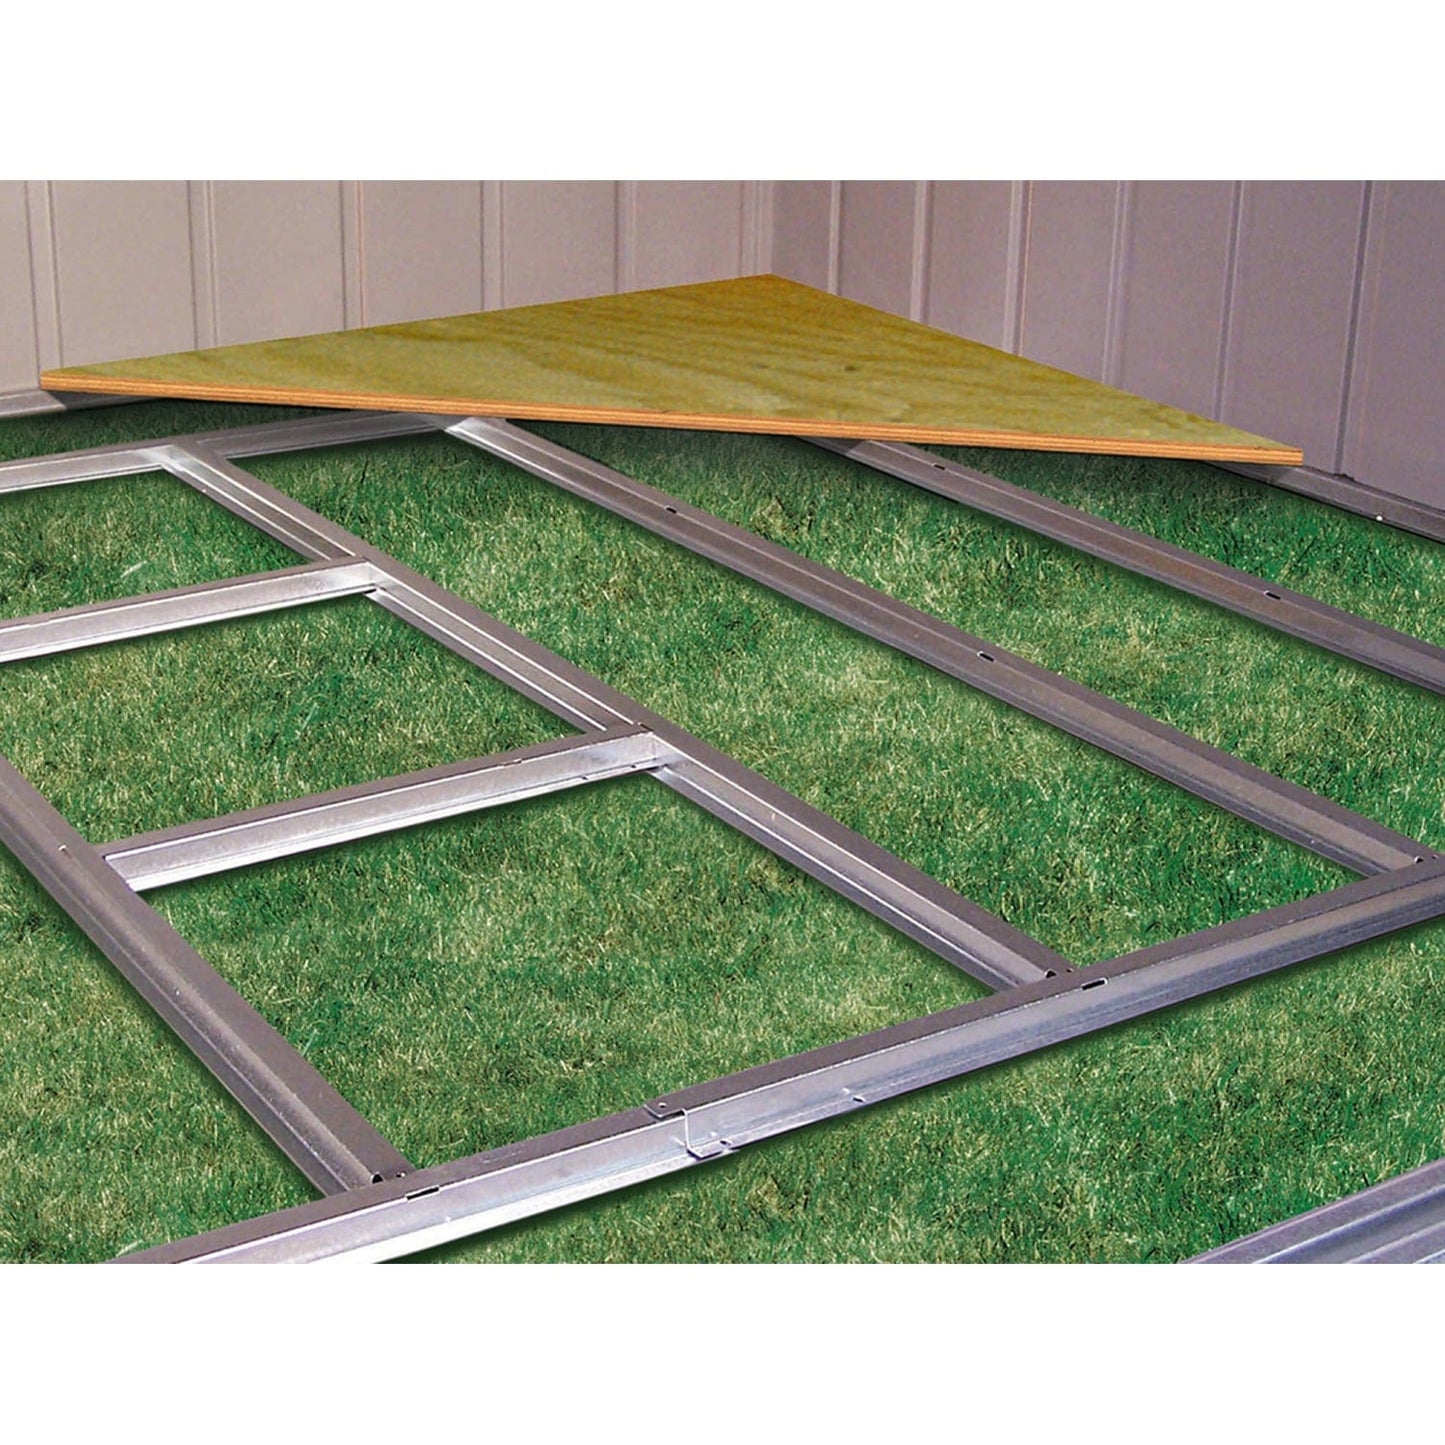 Arrow Shed Accessories Arrow | Floor Frame Kit for Arrow Elite Sheds 10x8 and 10x10 ft. FKE03